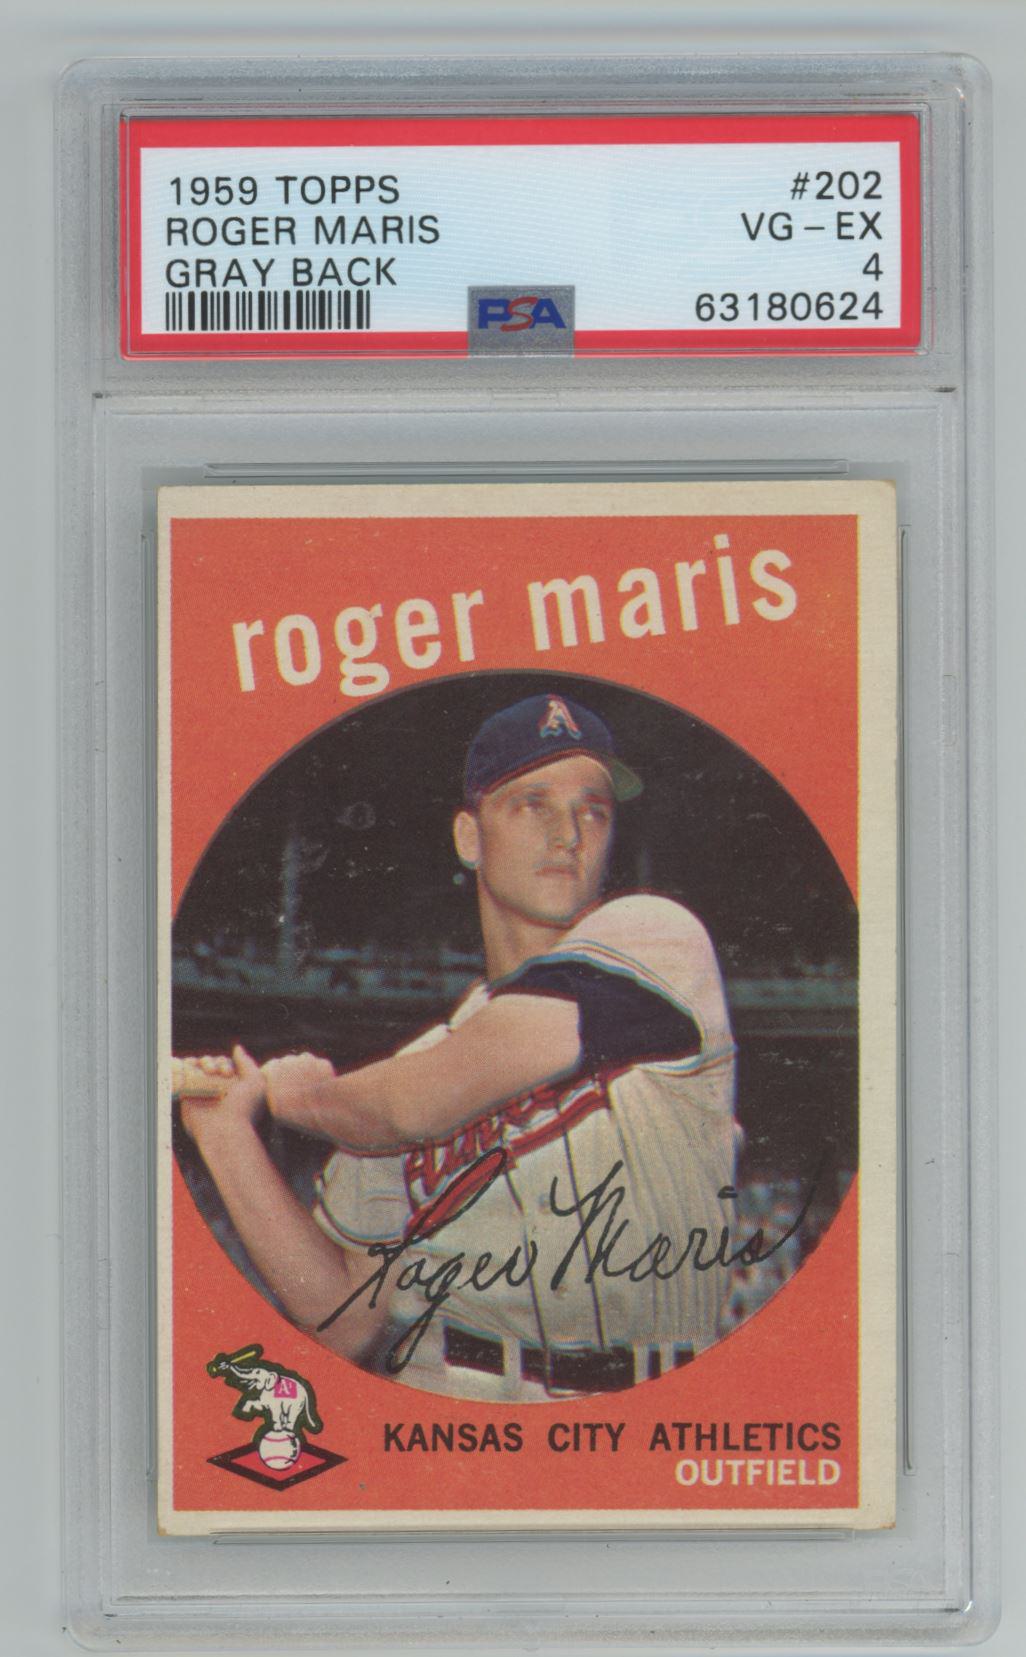 WHEN TOPPS HAD (BASE)BALLS!: 1960'S CAREER-CAPPERS: 1969 ROGER MARIS